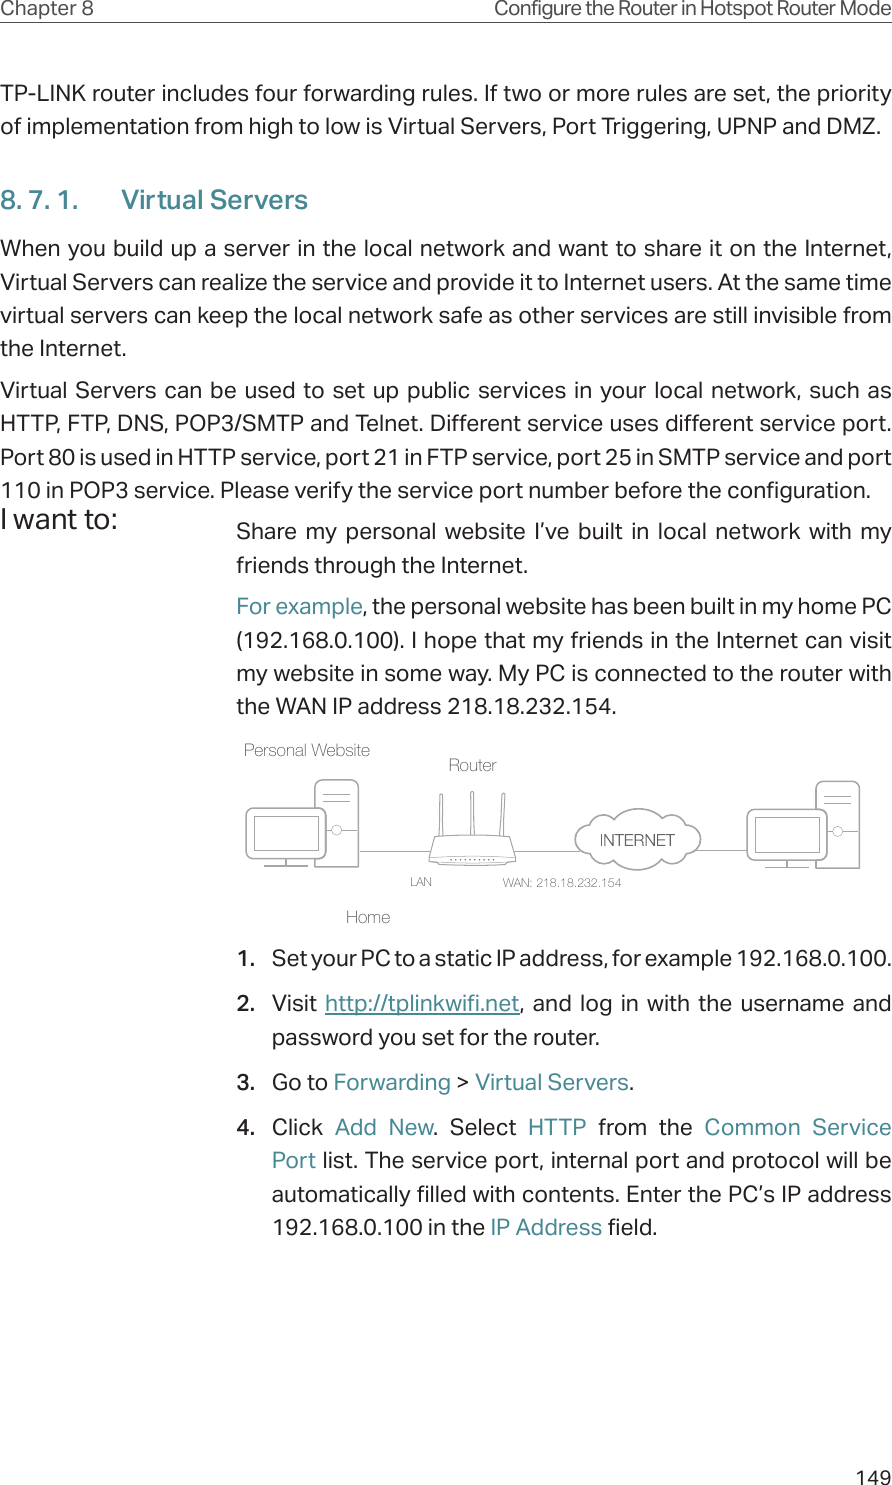 149Chapter 8 Configure the Router in Hotspot Router ModeTP-LINK router includes four forwarding rules. If two or more rules are set, the priority of implementation from high to low is Virtual Servers, Port Triggering, UPNP and DMZ.8. 7. 1.  Virtual ServersWhen you build up a server in the local network and want to share it on the Internet, Virtual Servers can realize the service and provide it to Internet users. At the same time virtual servers can keep the local network safe as other services are still invisible from the Internet.Virtual Servers can be used to set up public services in your local network, such as HTTP, FTP, DNS, POP3/SMTP and Telnet. Different service uses different service port. Port 80 is used in HTTP service, port 21 in FTP service, port 25 in SMTP service and port 110 in POP3 service. Please verify the service port number before the configuration.Share my personal website I’ve built in local network with my friends through the Internet.For example, the personal website has been built in my home PC (192.168.0.100). I hope that my friends in the Internet can visit my website in some way. My PC is connected to the router with the WAN IP address 218.18.232.154.Router WAN: 218.18.232.154LANHomePersonal Website 1.  Set your PC to a static IP address, for example 192.168.0.100.2.  Visit  http://tplinkwifi.net, and log in with the username and password you set for the router.3.  Go to Forwarding &gt; Virtual Servers.4.  Click  Add New. Select HTTP from the Common Service Port list. The service port, internal port and protocol will be automatically filled with contents. Enter the PC’s IP address 192.168.0.100 in the IP Address field.I want to: